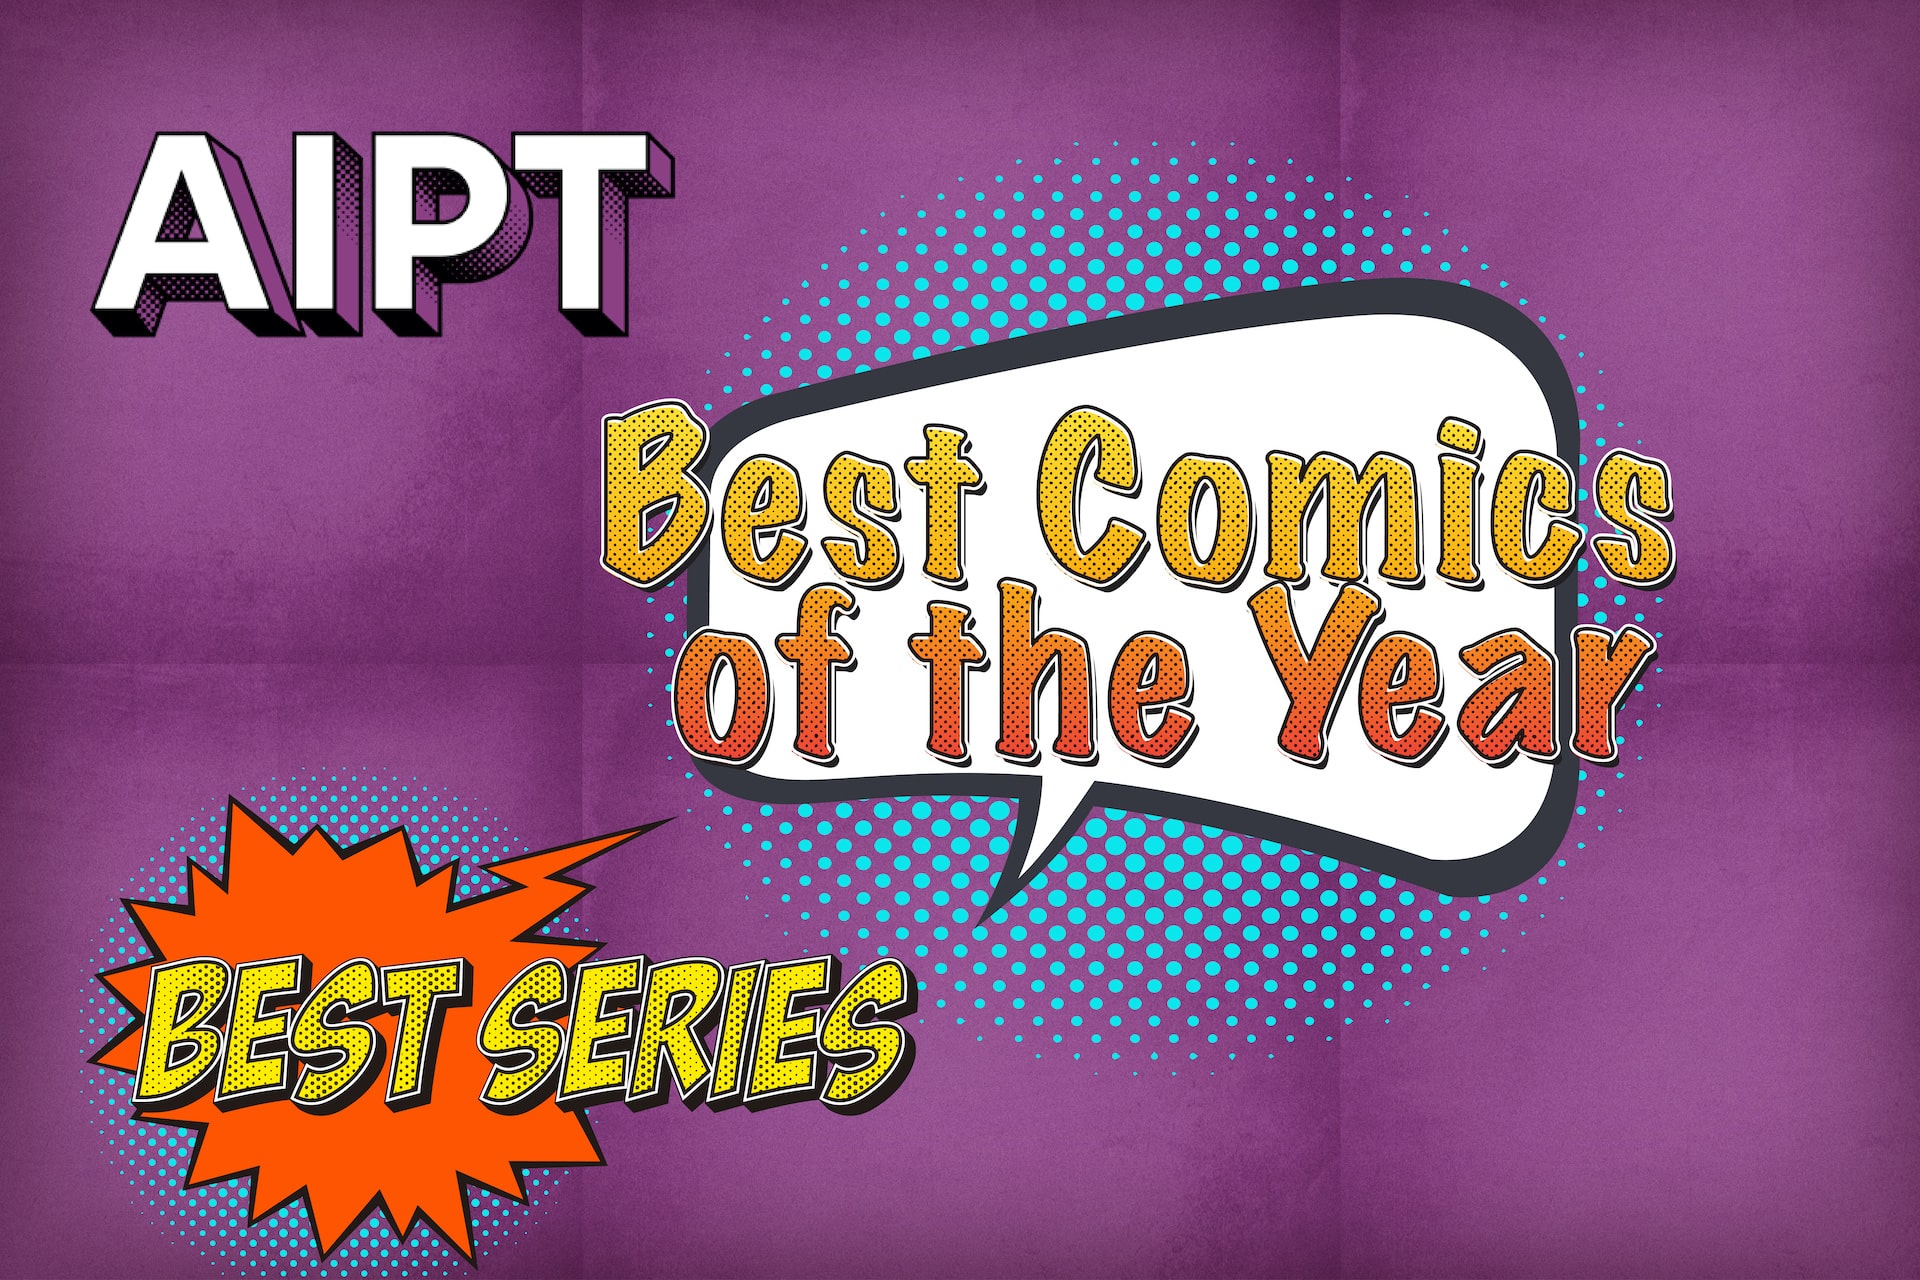 AIPT’s Best Comics of the Year: Best Series